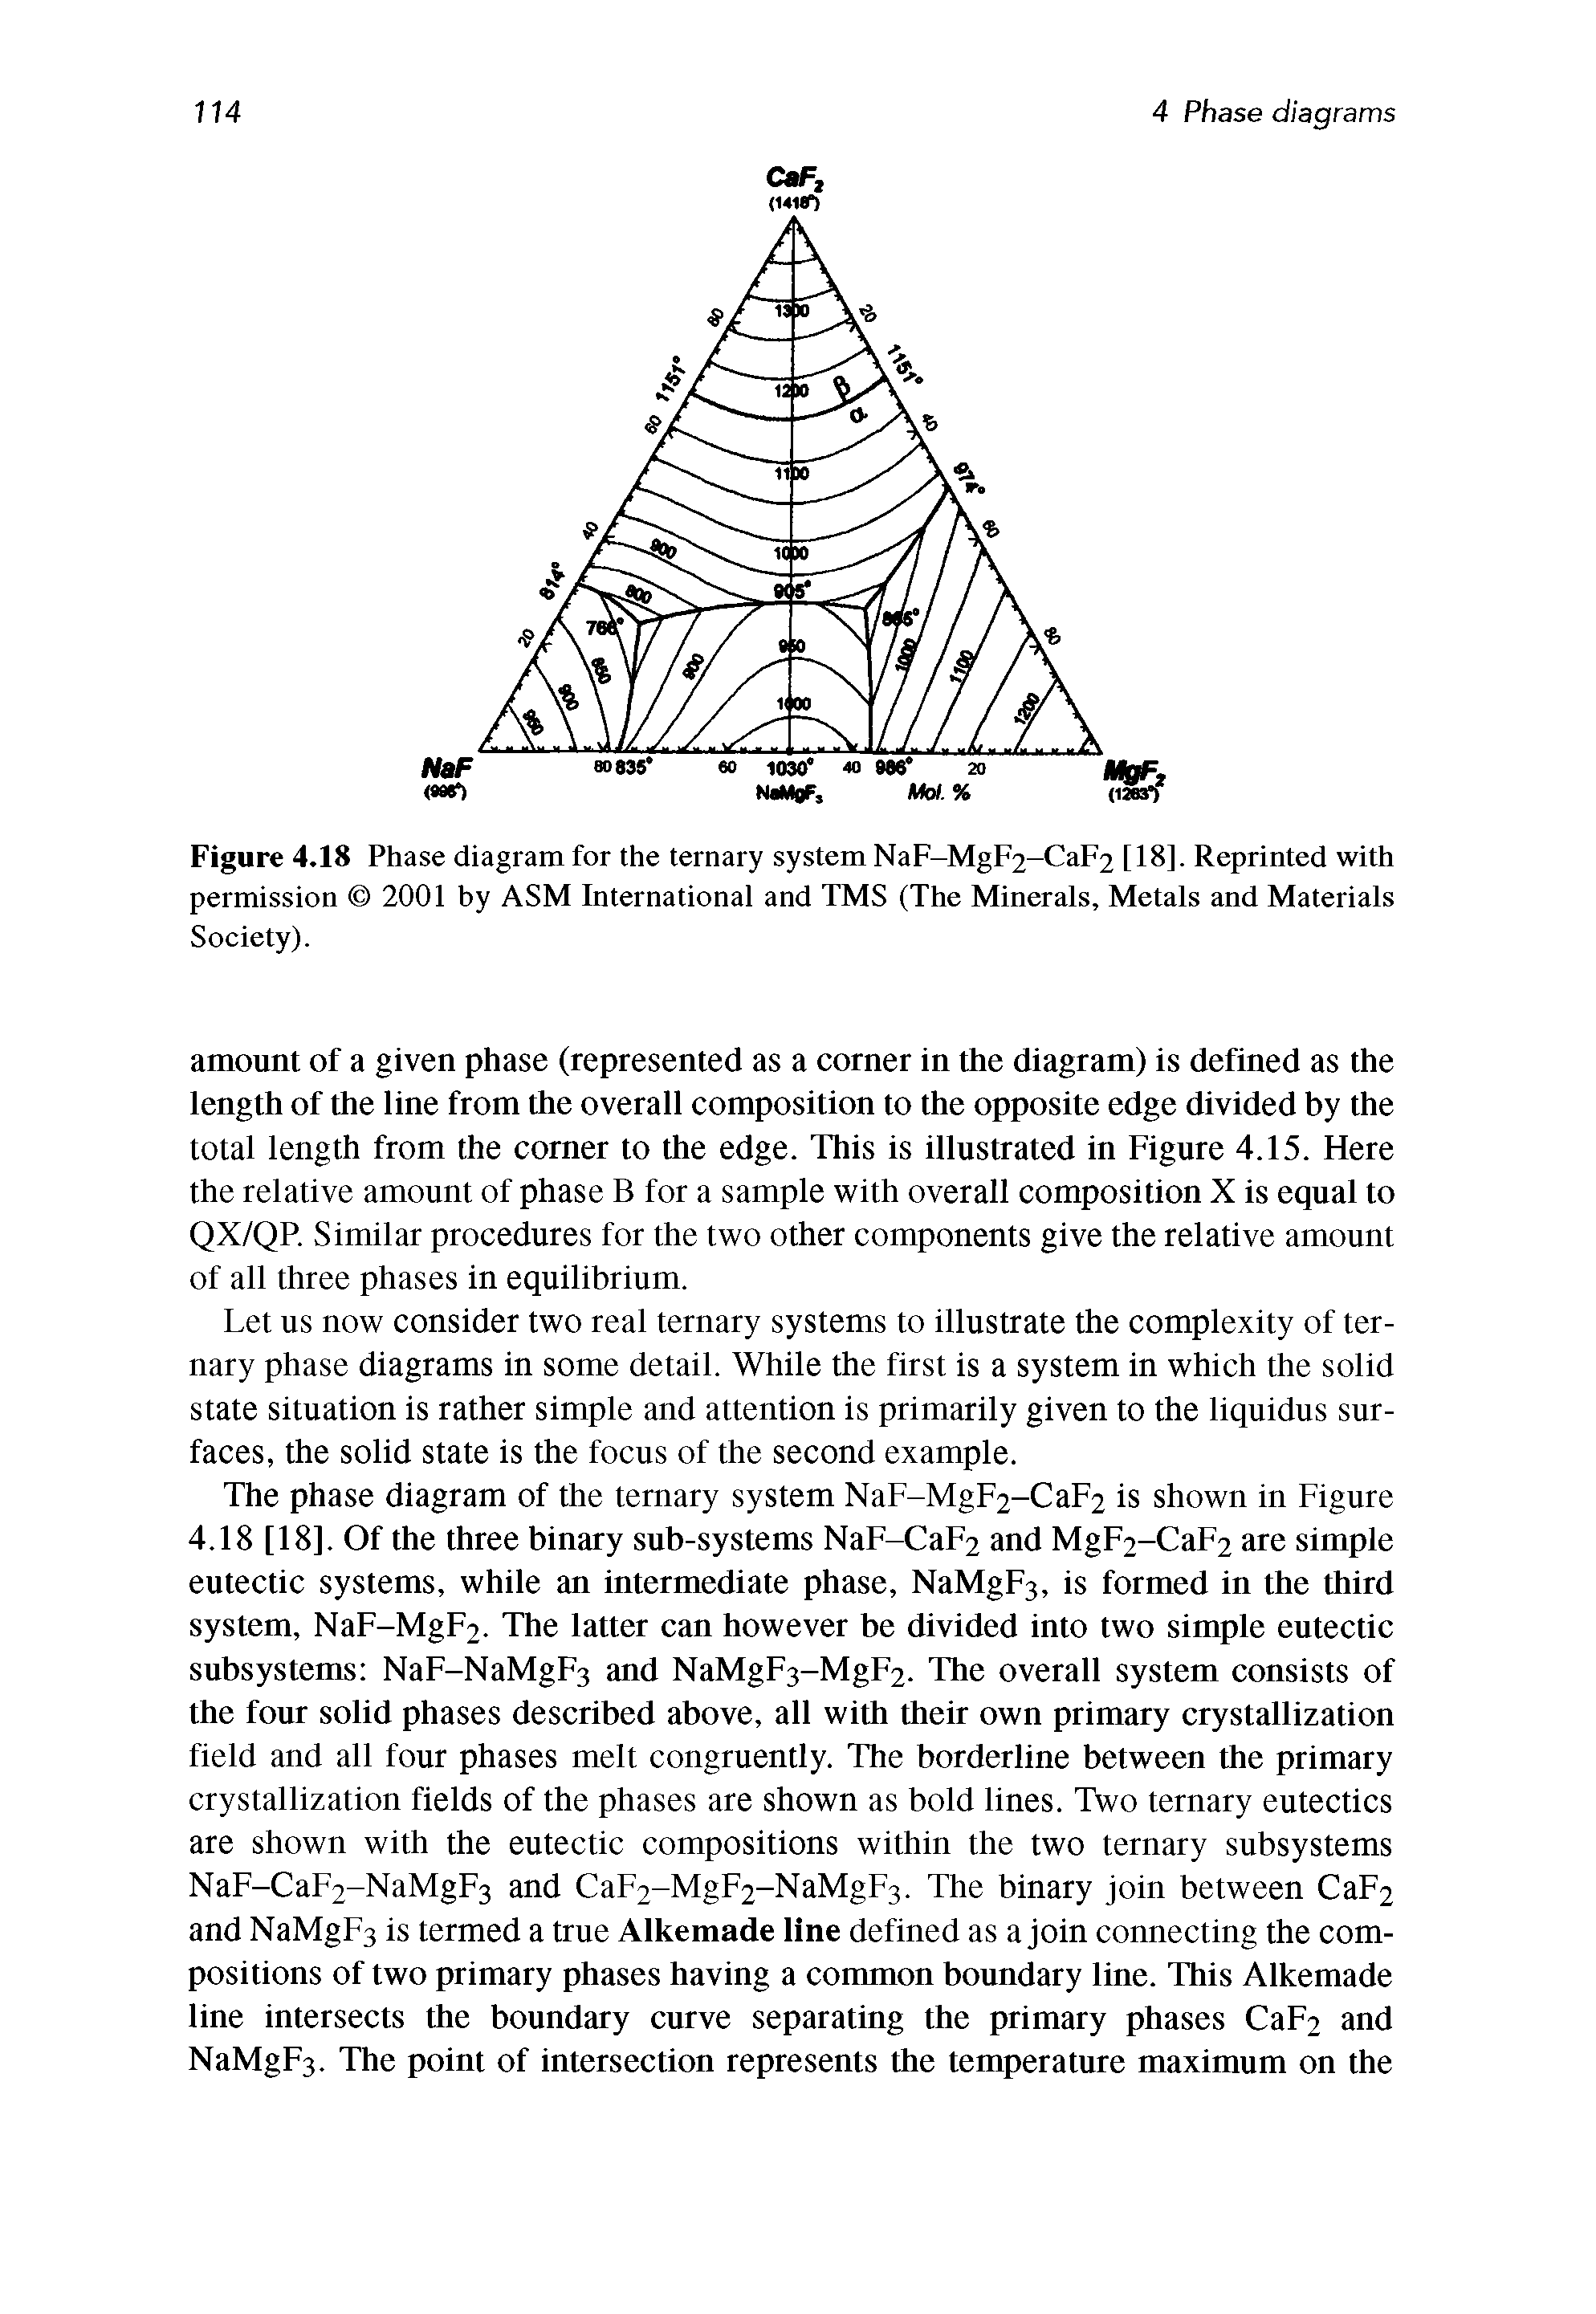 Figure 4.18 Phase diagram for the ternary system NaF-MgF2-CaF2 [18]. Reprinted with permission 2001 by ASM International and TMS (The Minerals, Metals and Materials Society).